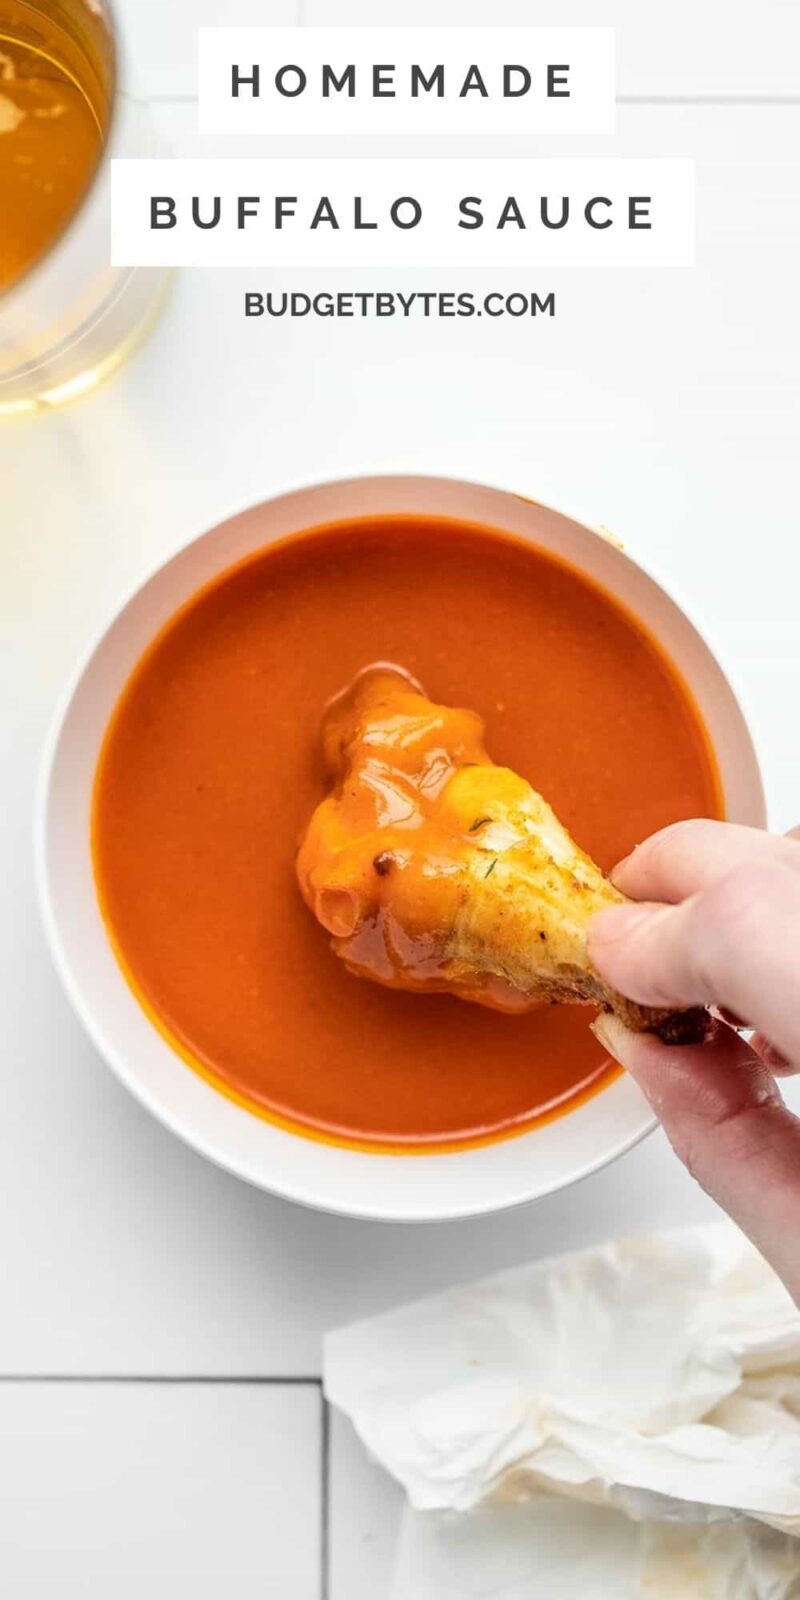 a hand dipping a chicken wing into a bowl of buffalo sauce